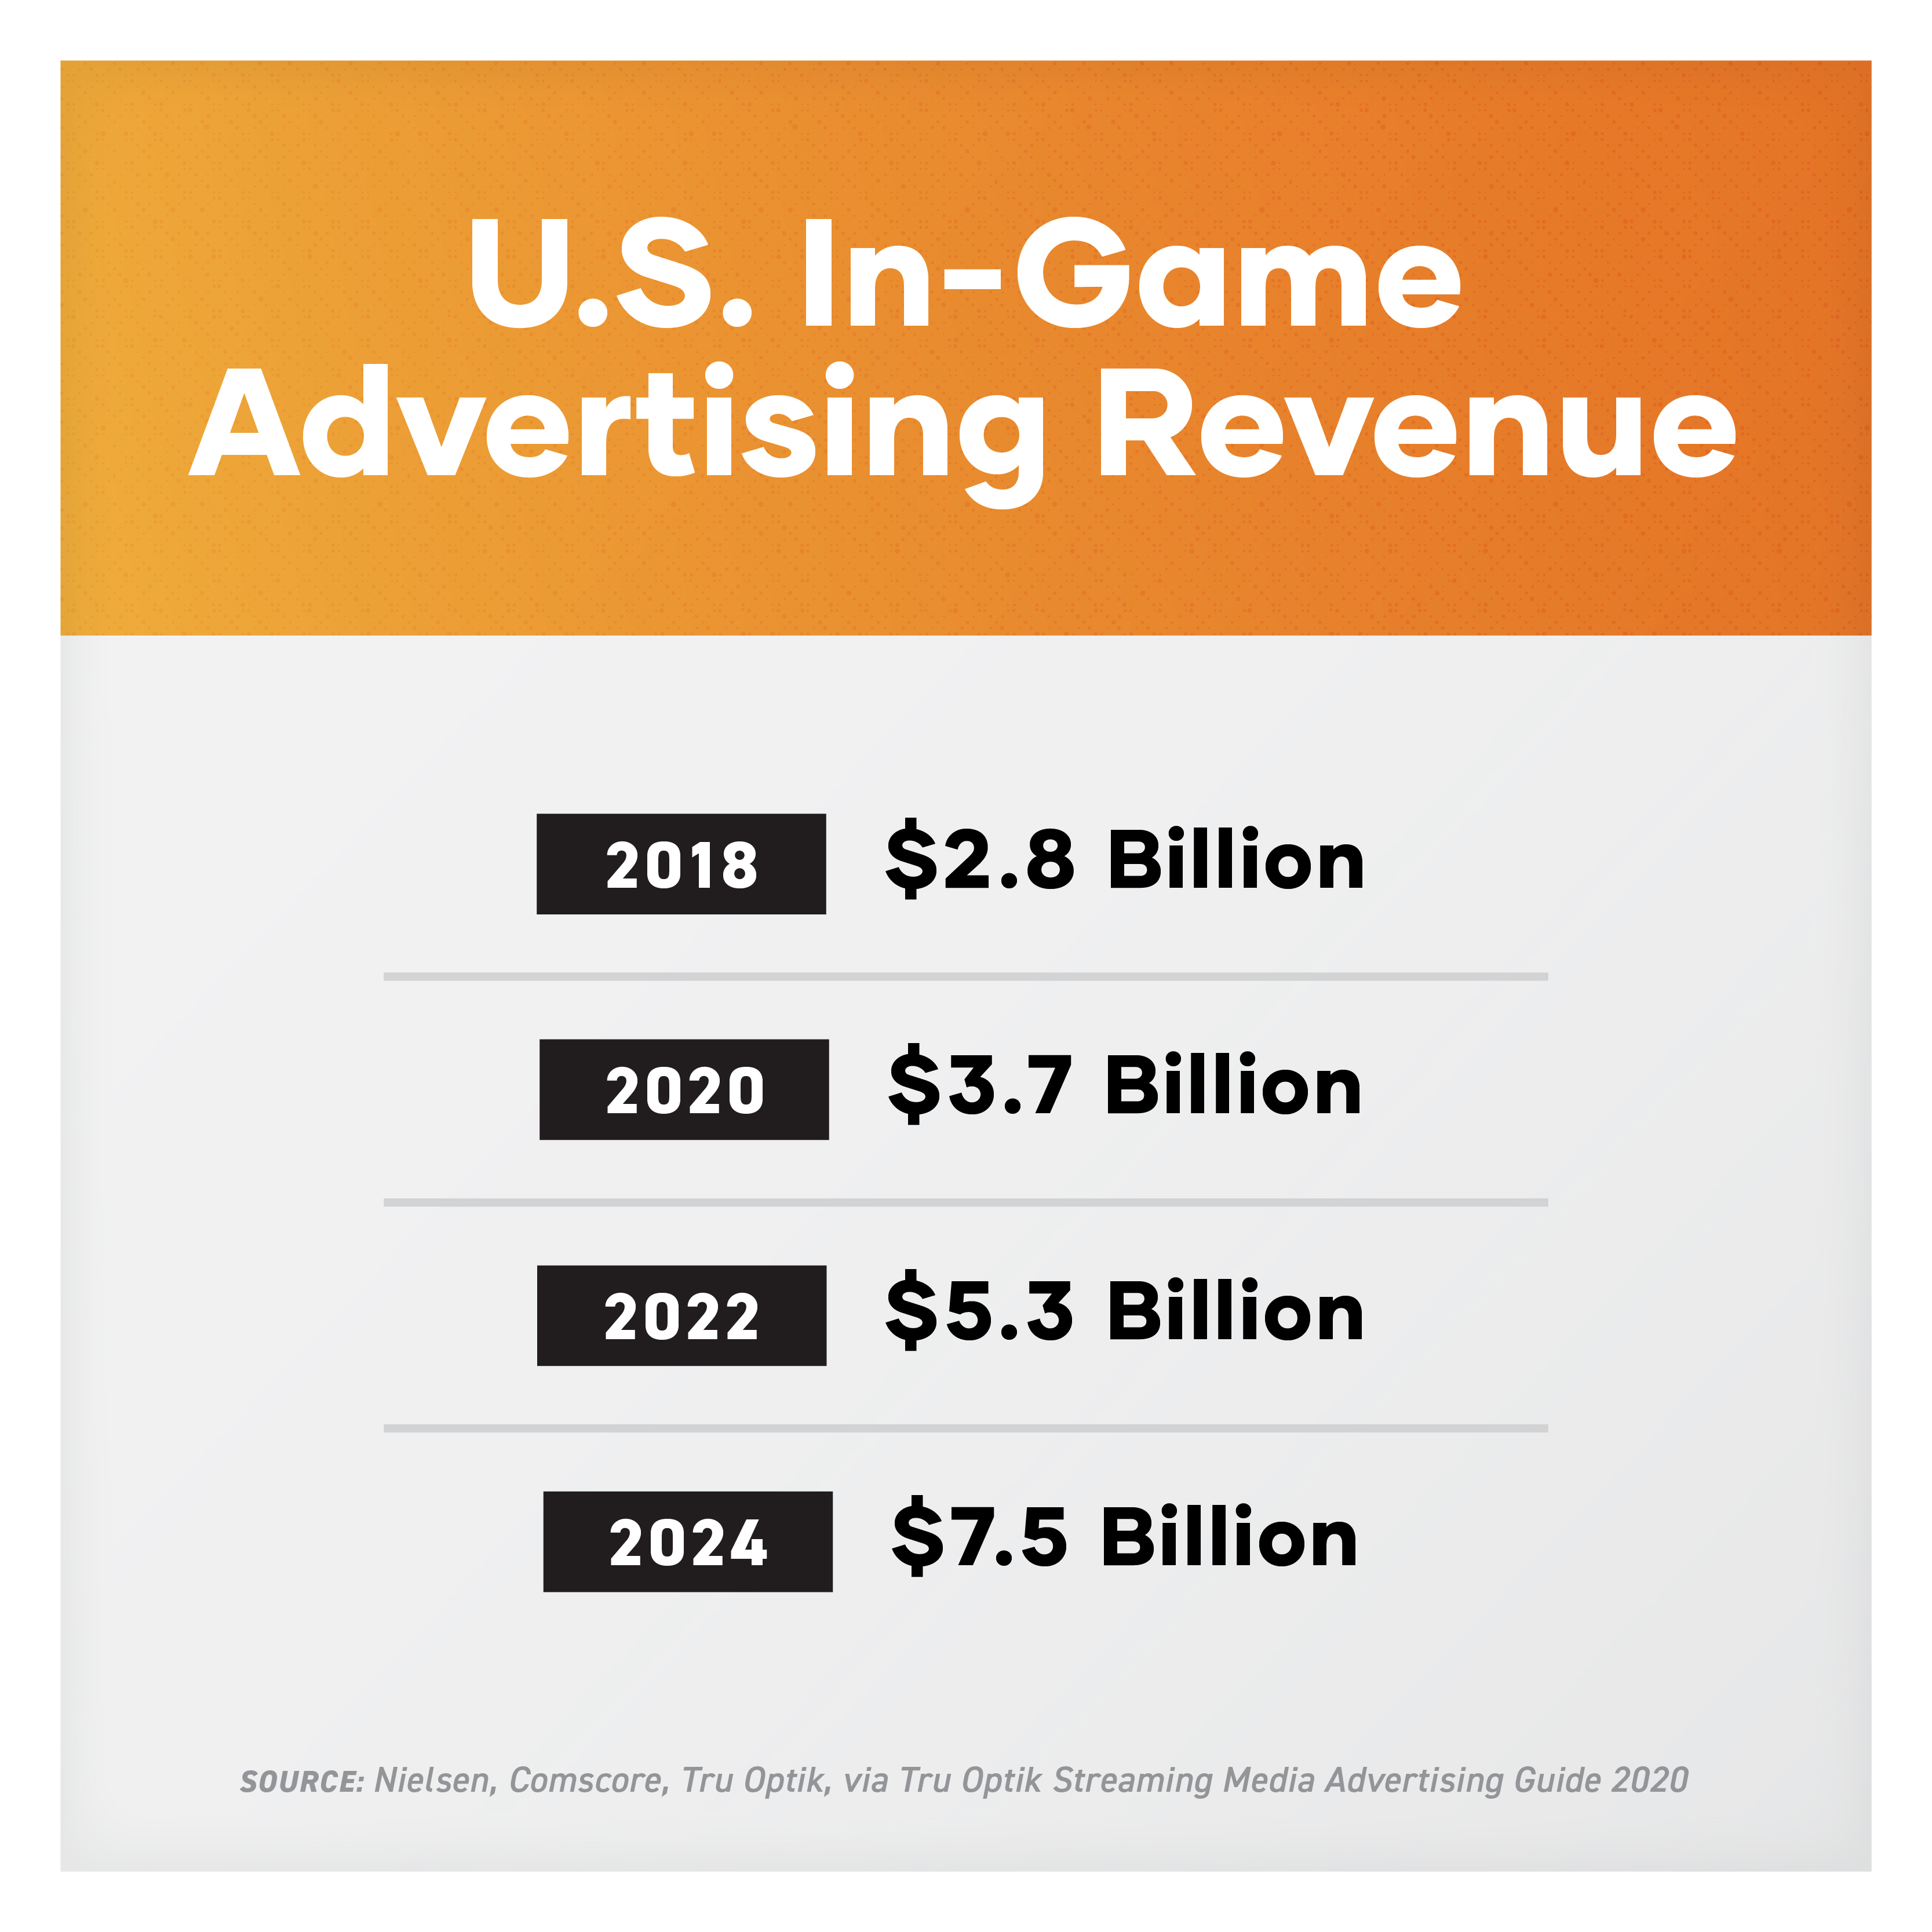 U.S. In-game Ad Revenue Growth